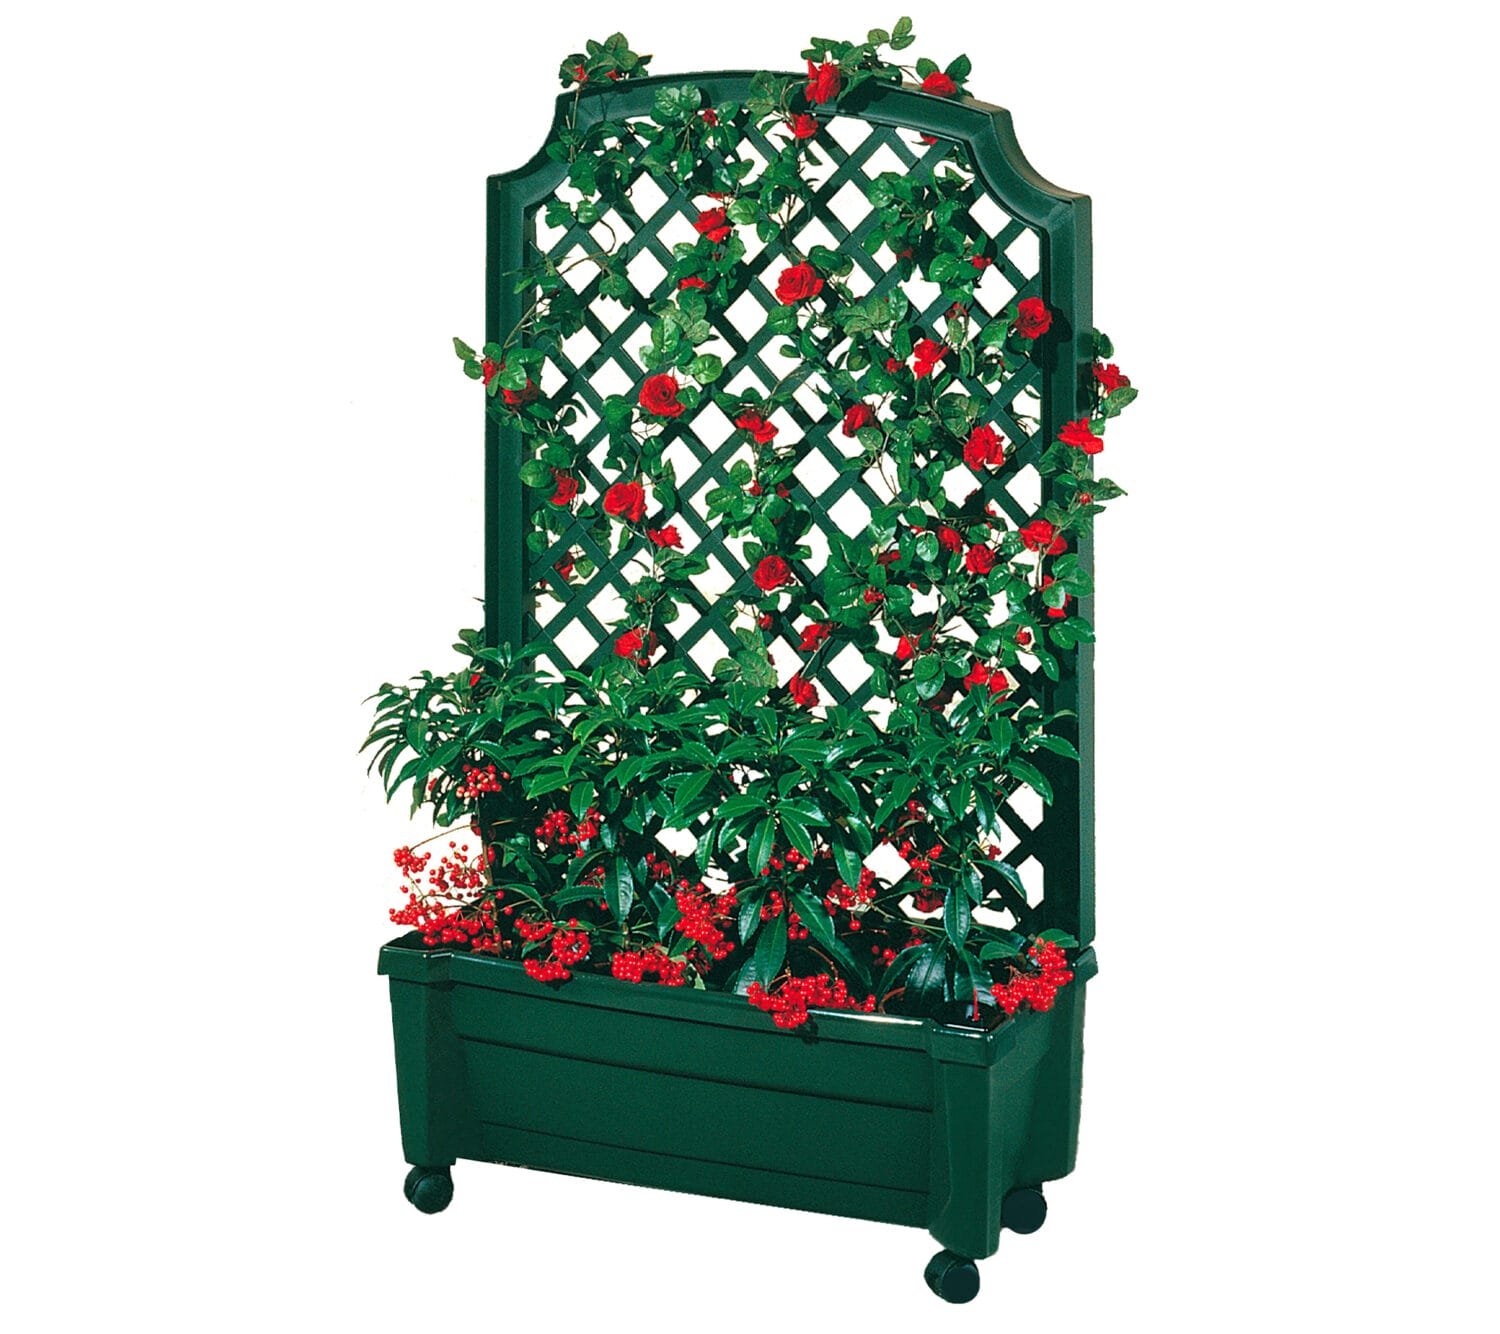 Calypso Planter with Trellis and Water Reservoirer2